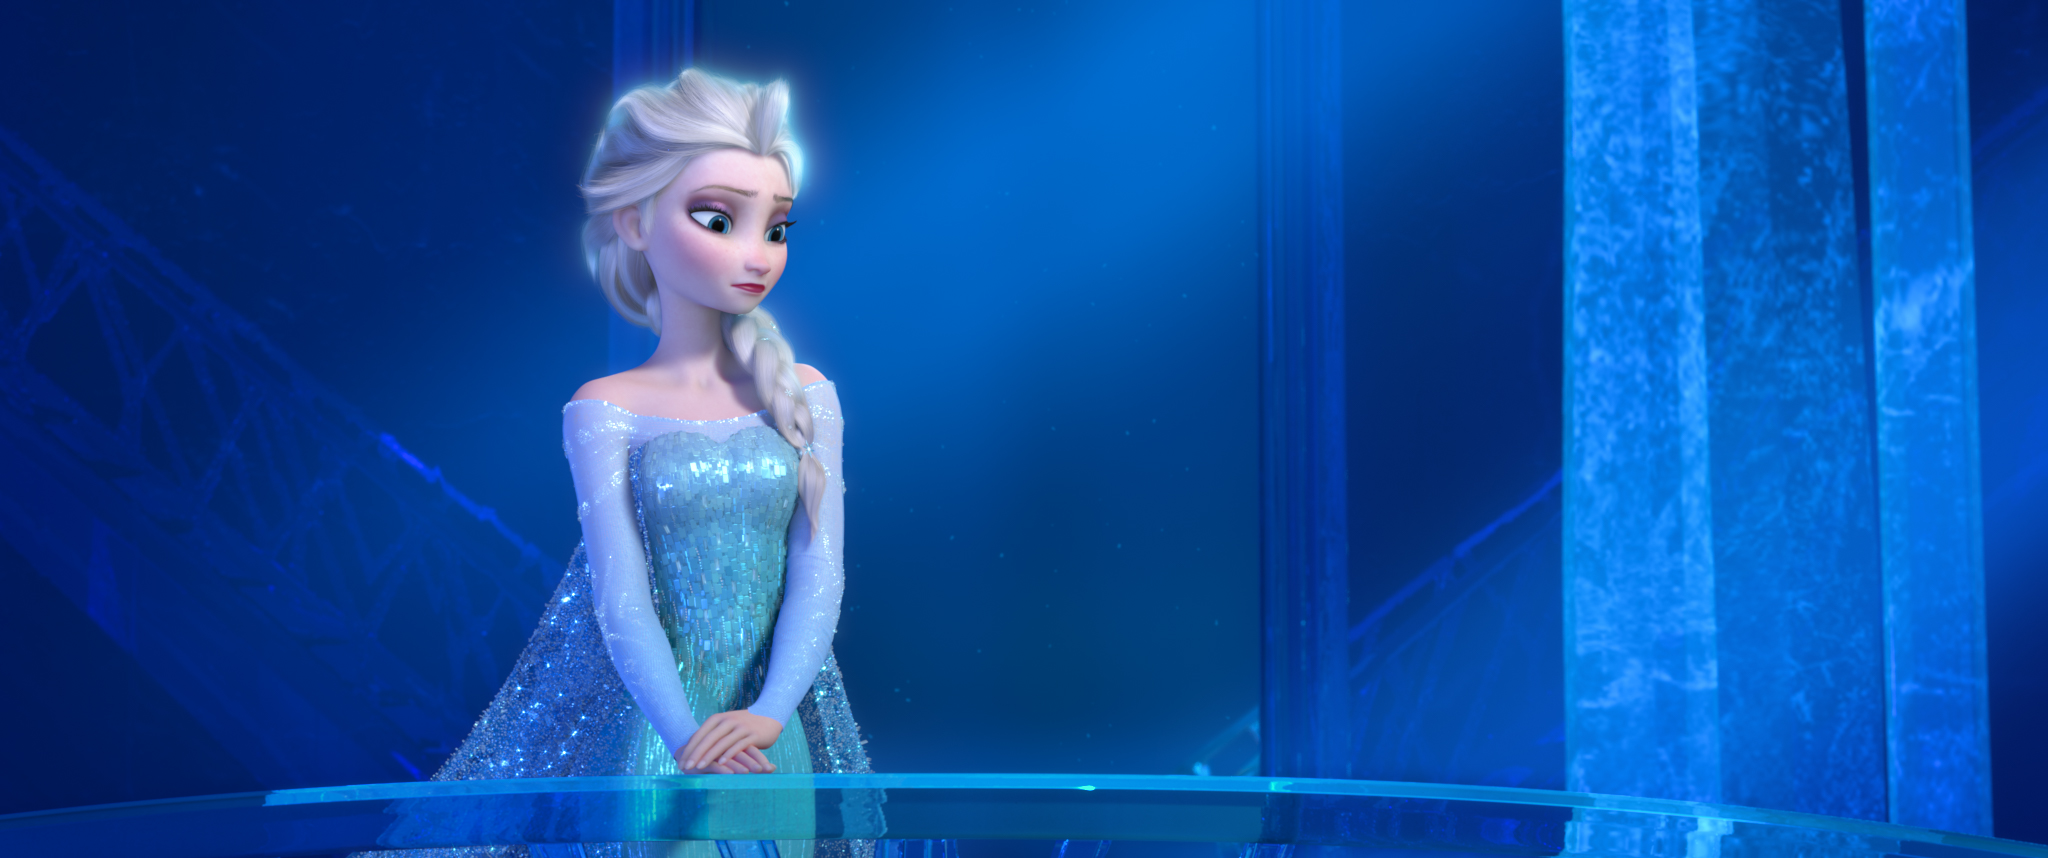 Frozen Wallpaper And Background 2048x858 ID496256